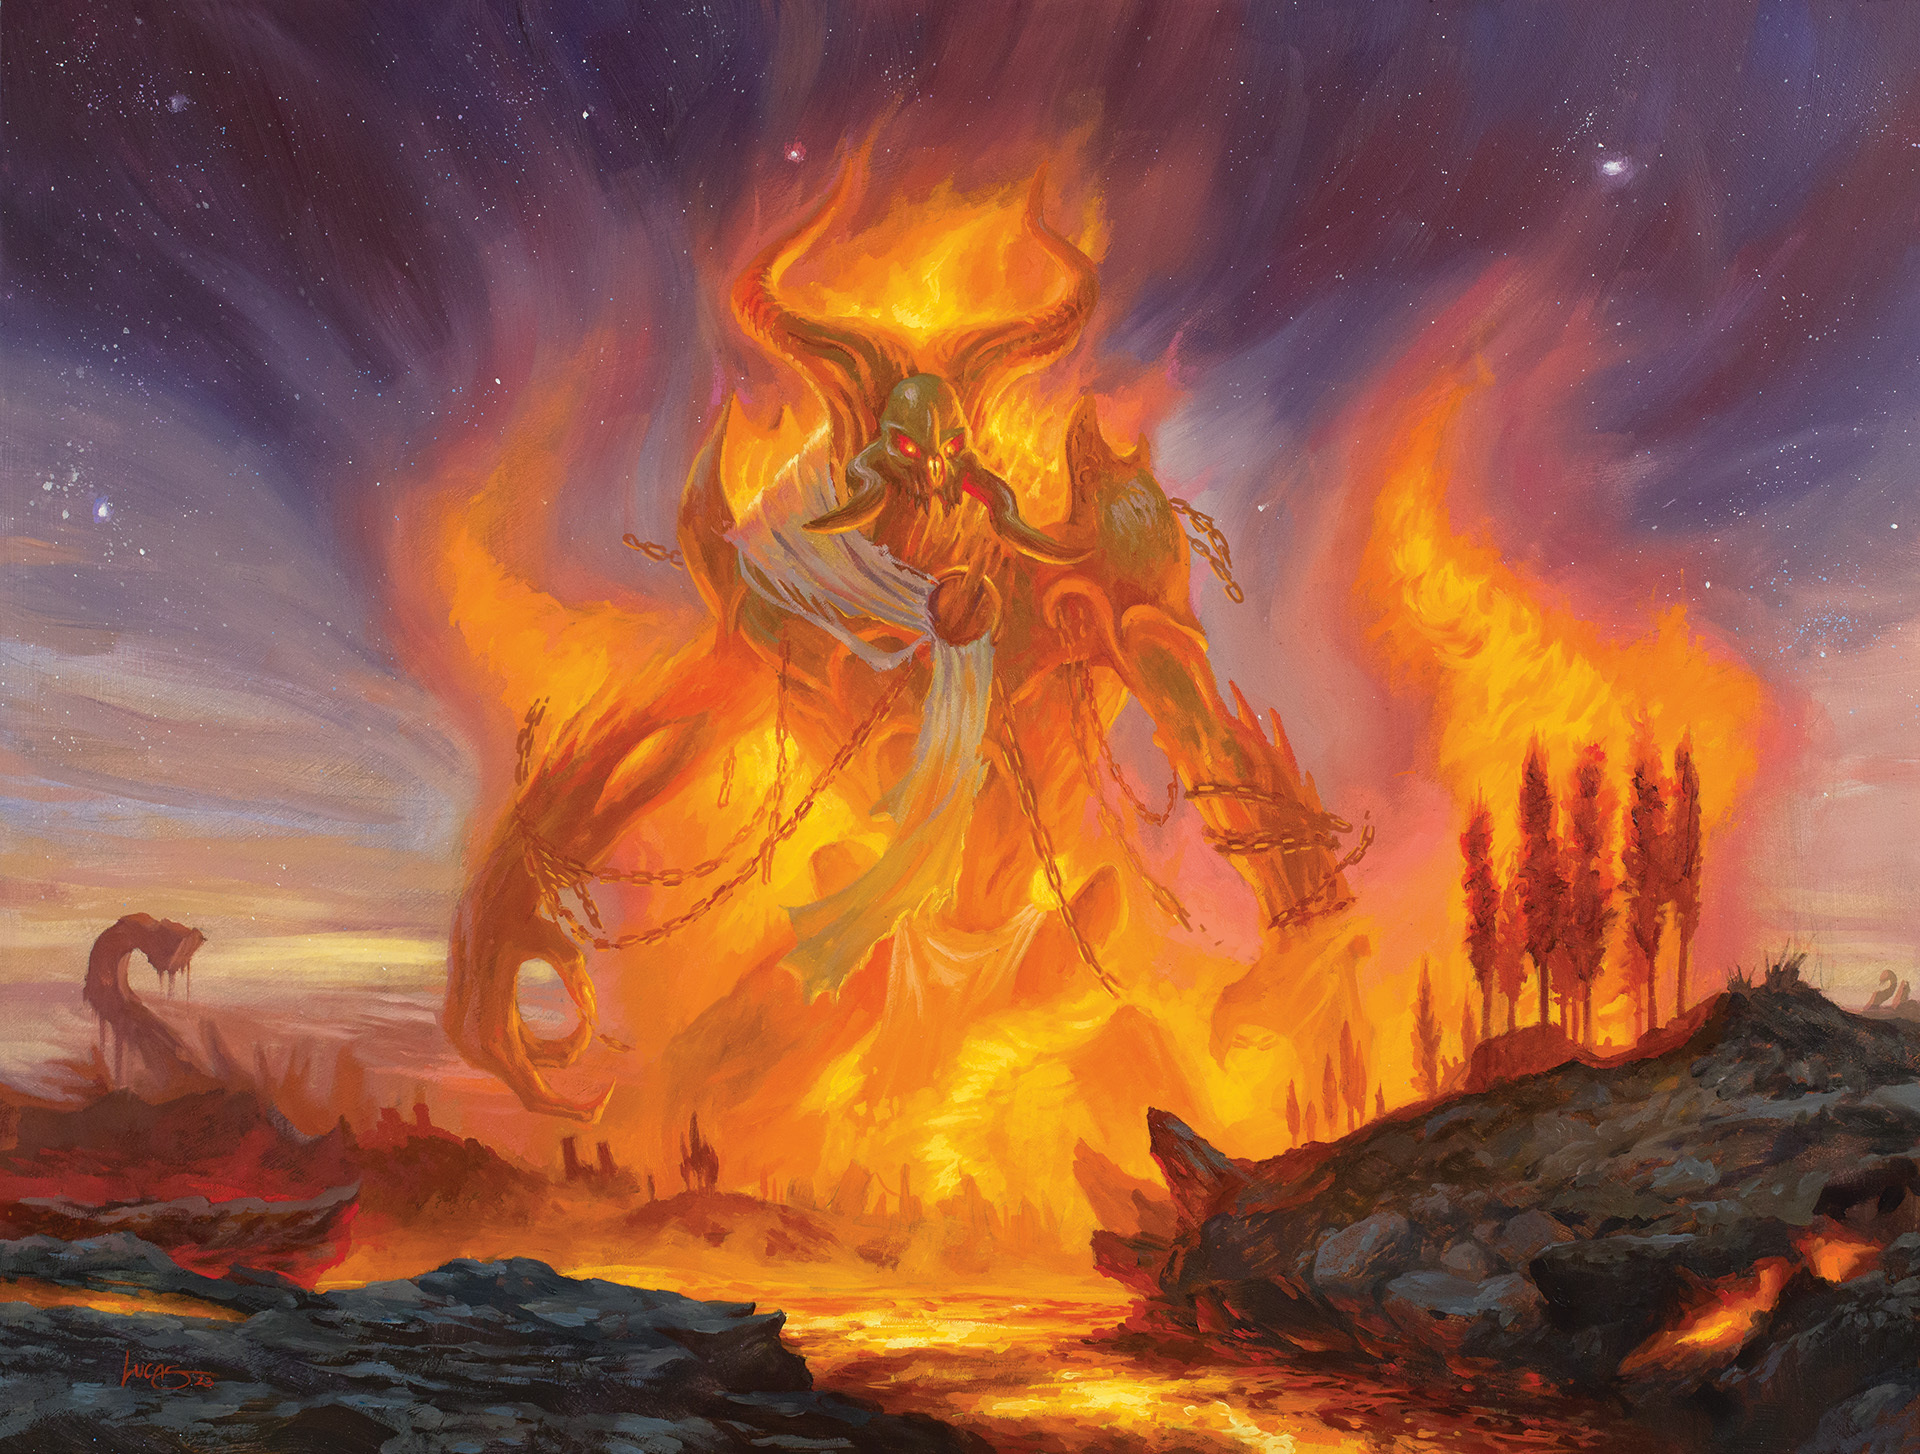 Phlage, Titan of Fire’s Fury features a giant demon with horns rising above a forest fire. Trees burn in the foreground.